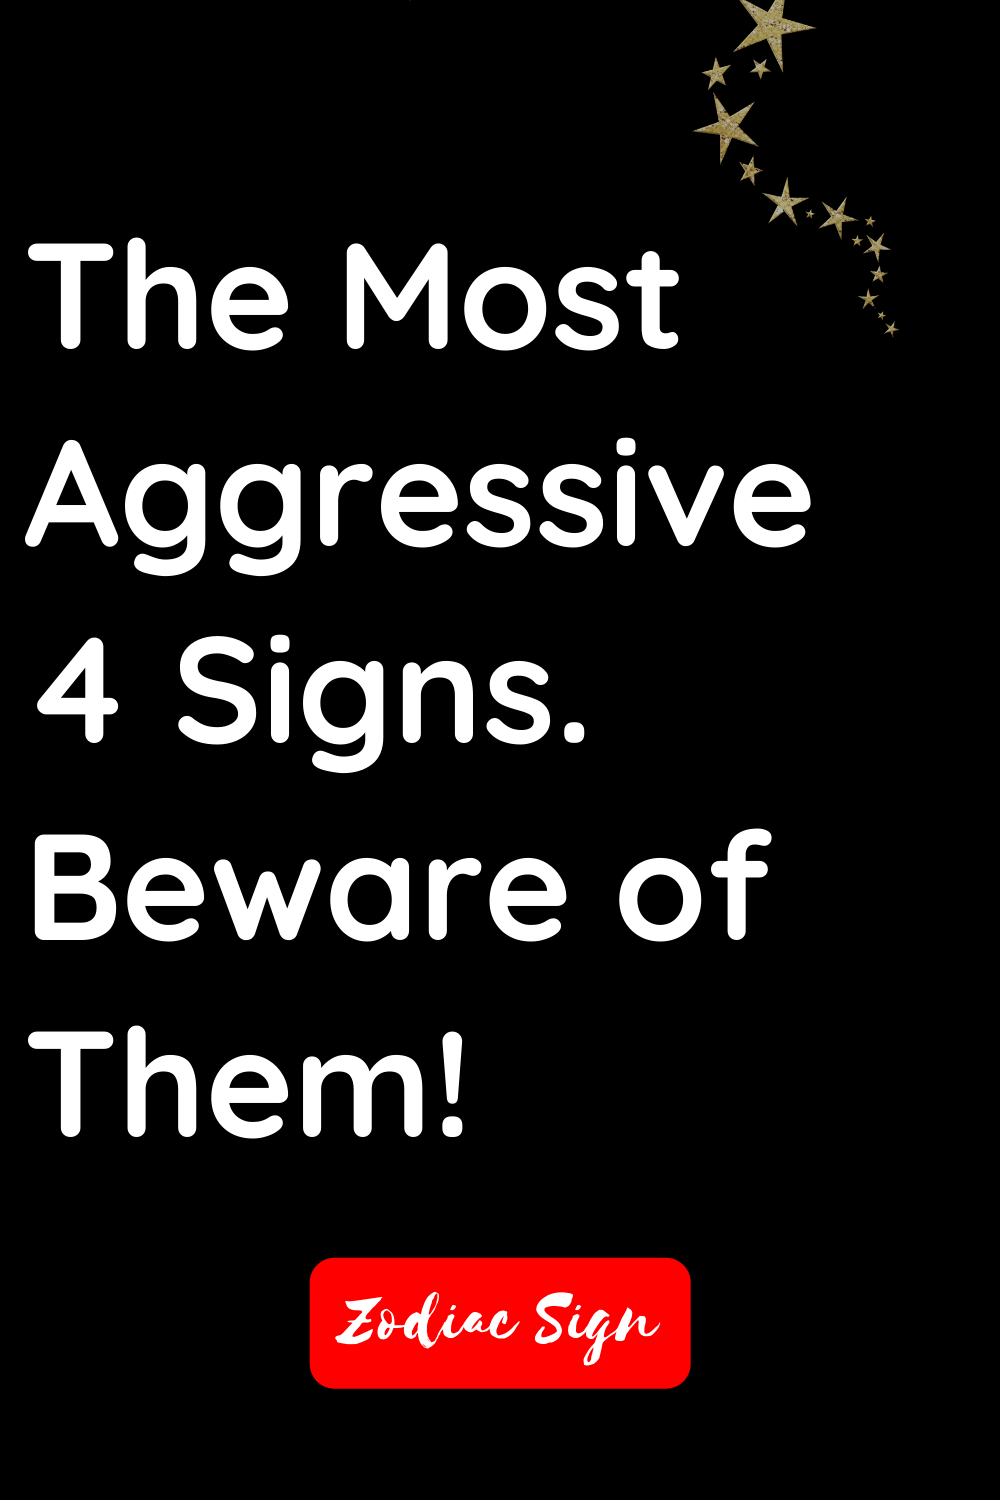 The most aggressive 4 signs. Beware of them!